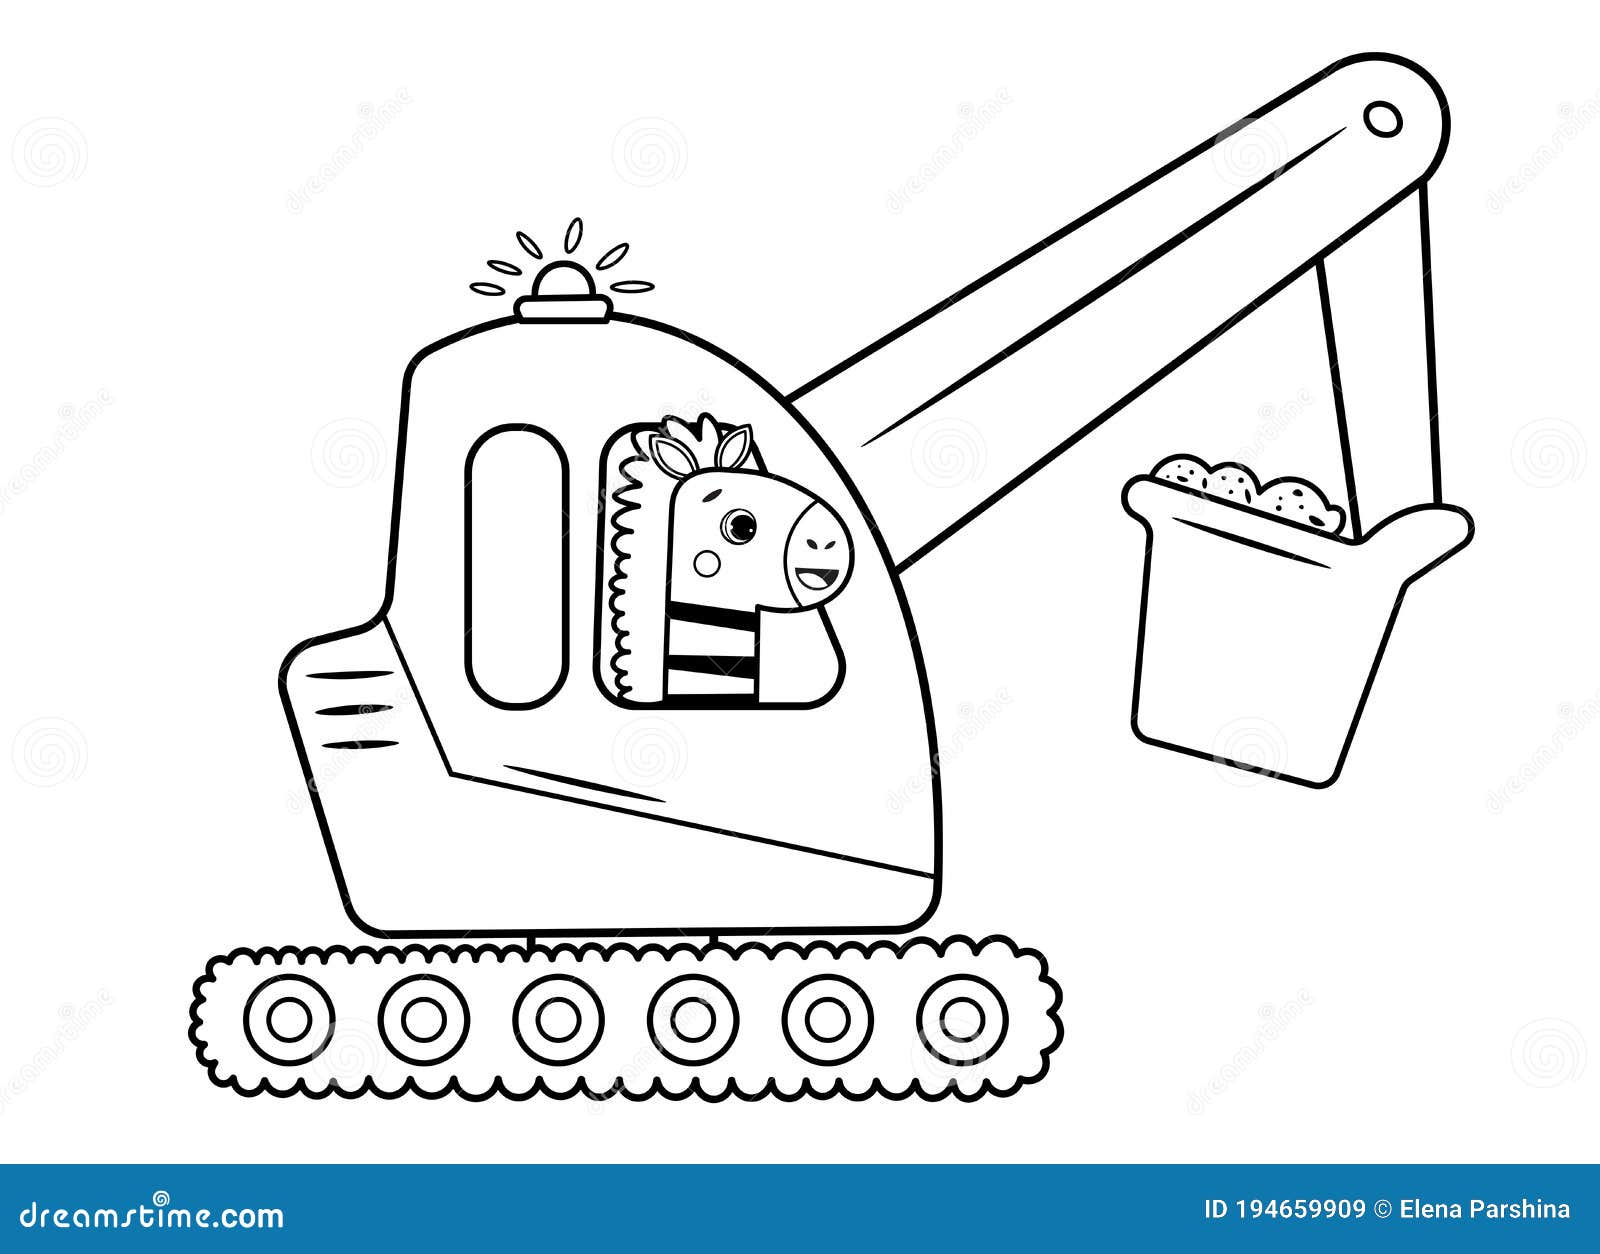 Coloring Page Outline of Cartoon Excavator with Animal. Vector ...